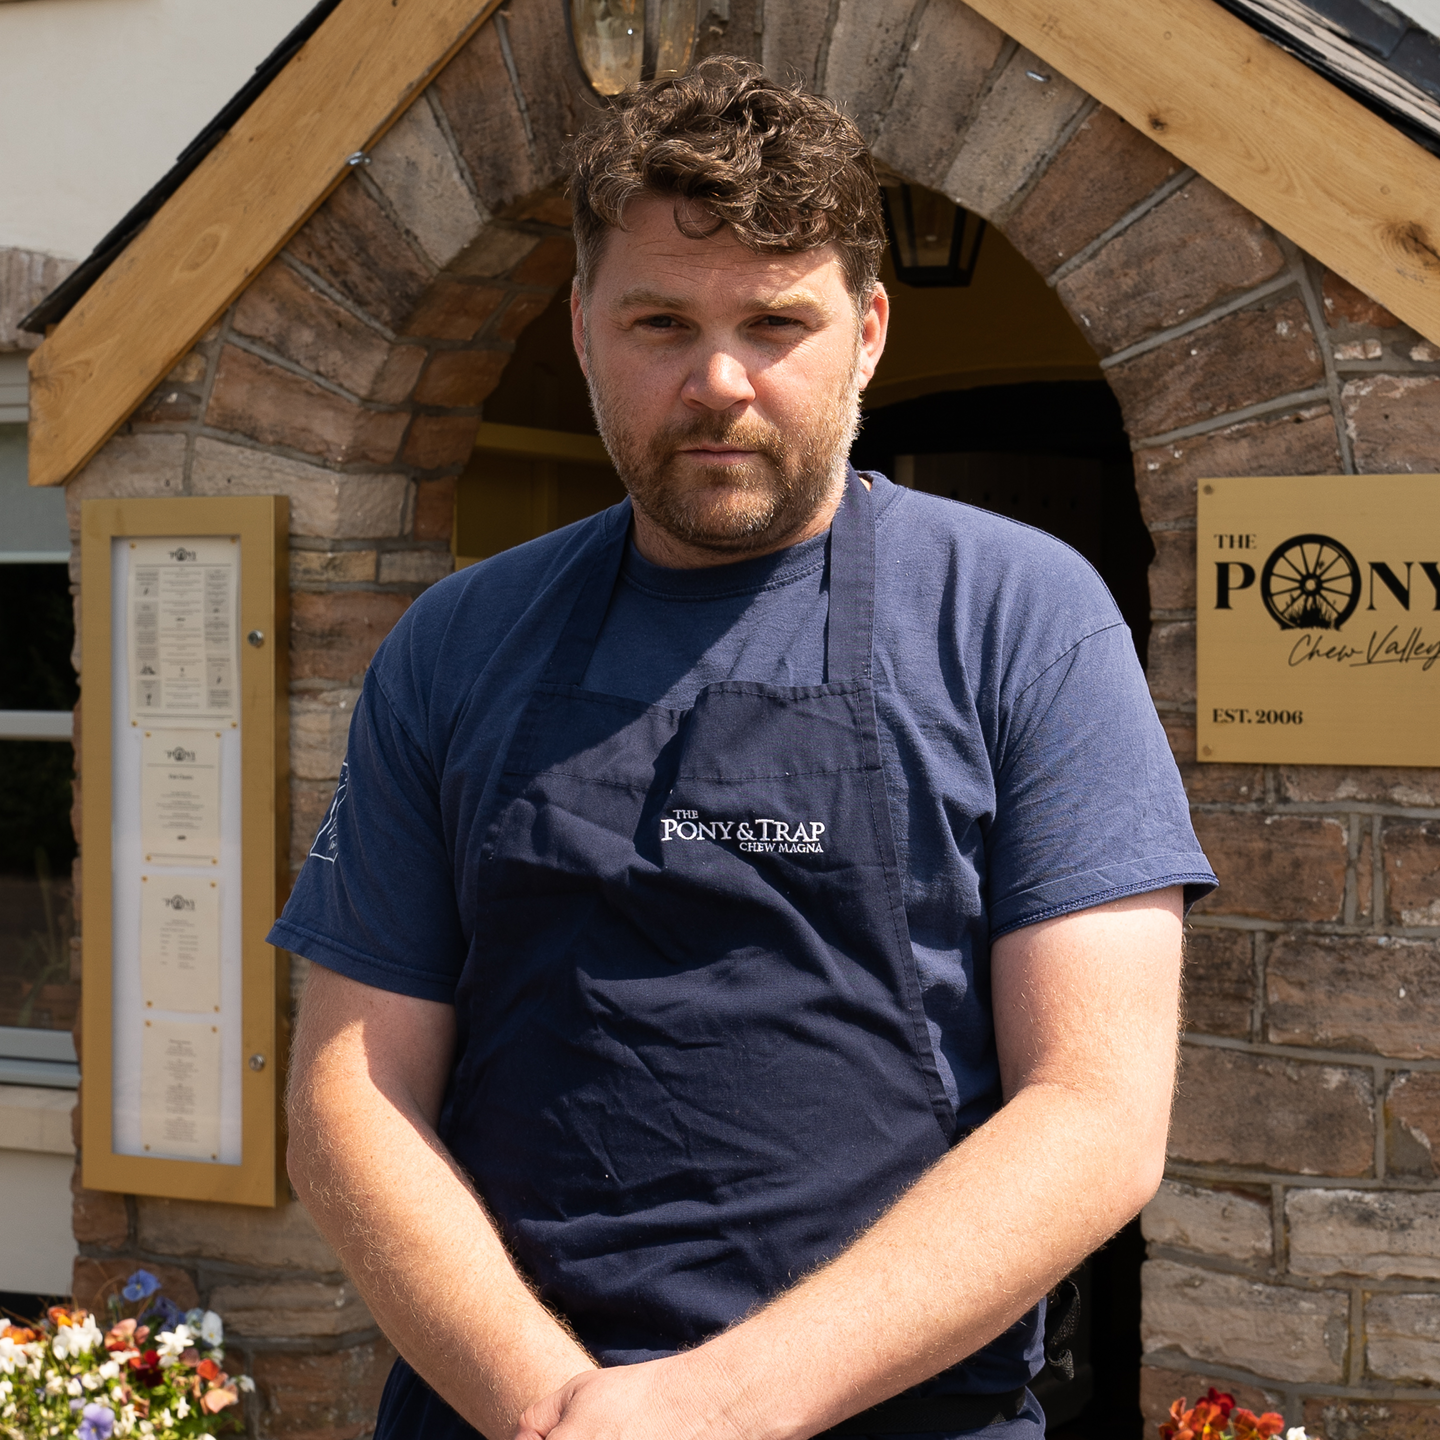 The Evolution of the Pony - An Interview With Josh Eggleton